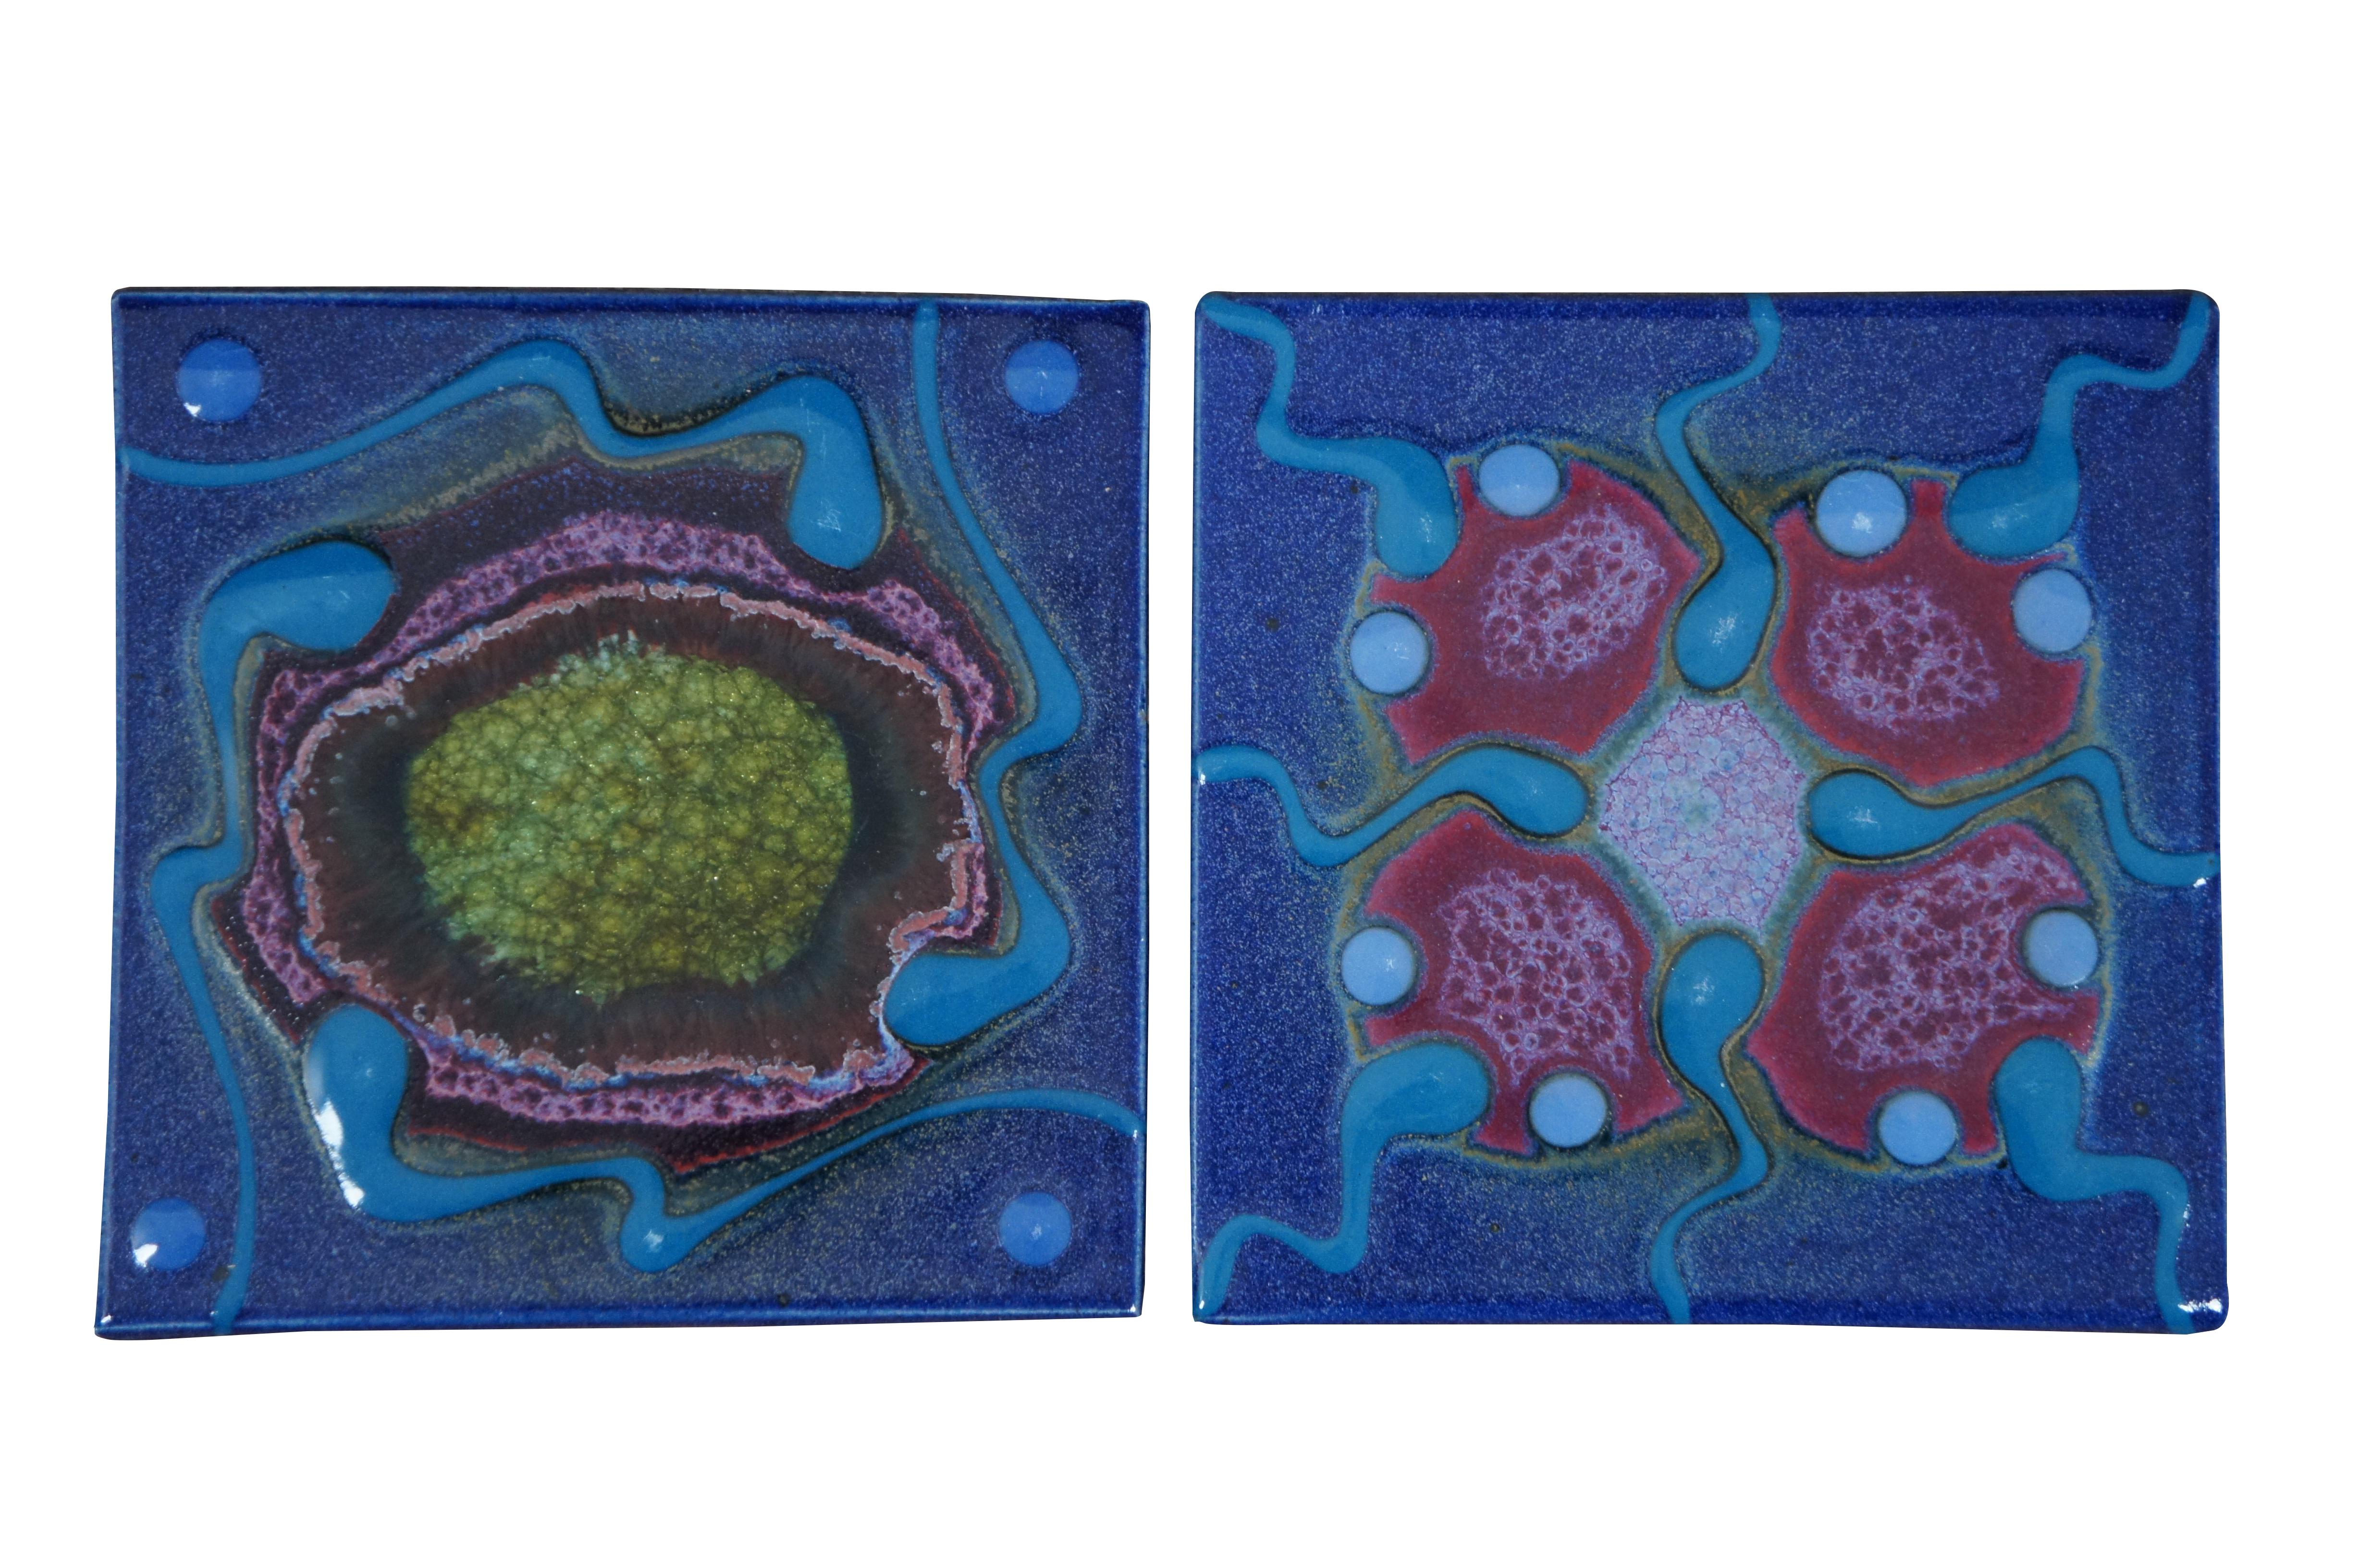 Set of four late 20th century ceramic art pottery tiles / trivets / hot pads by Matthew Patton of Orcas Island Pottery. Set includes two larger and two smaller tiles with cork pads underneath, and feature four designs in blue, green, red, and